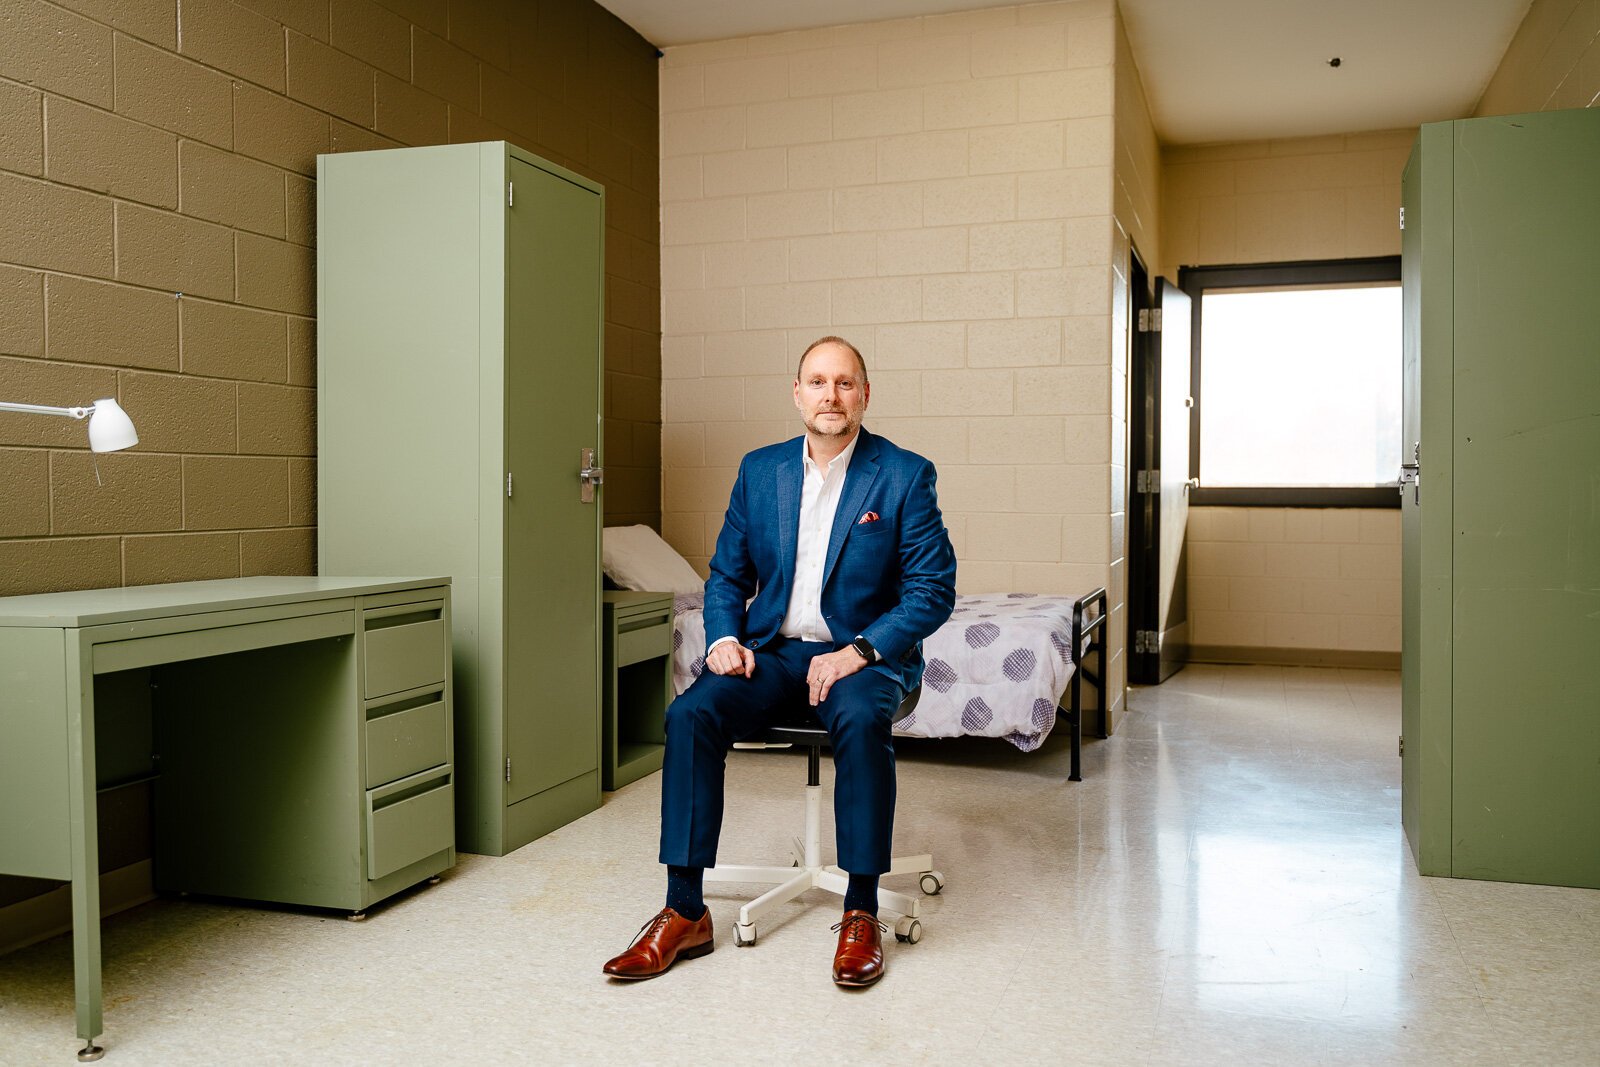 Jamie Winkler, executive director of the Salvation Army Great Lakes Harbor Light System, in a short term residential care room at the Salvation Army's Harbor Light facility in Detroit.